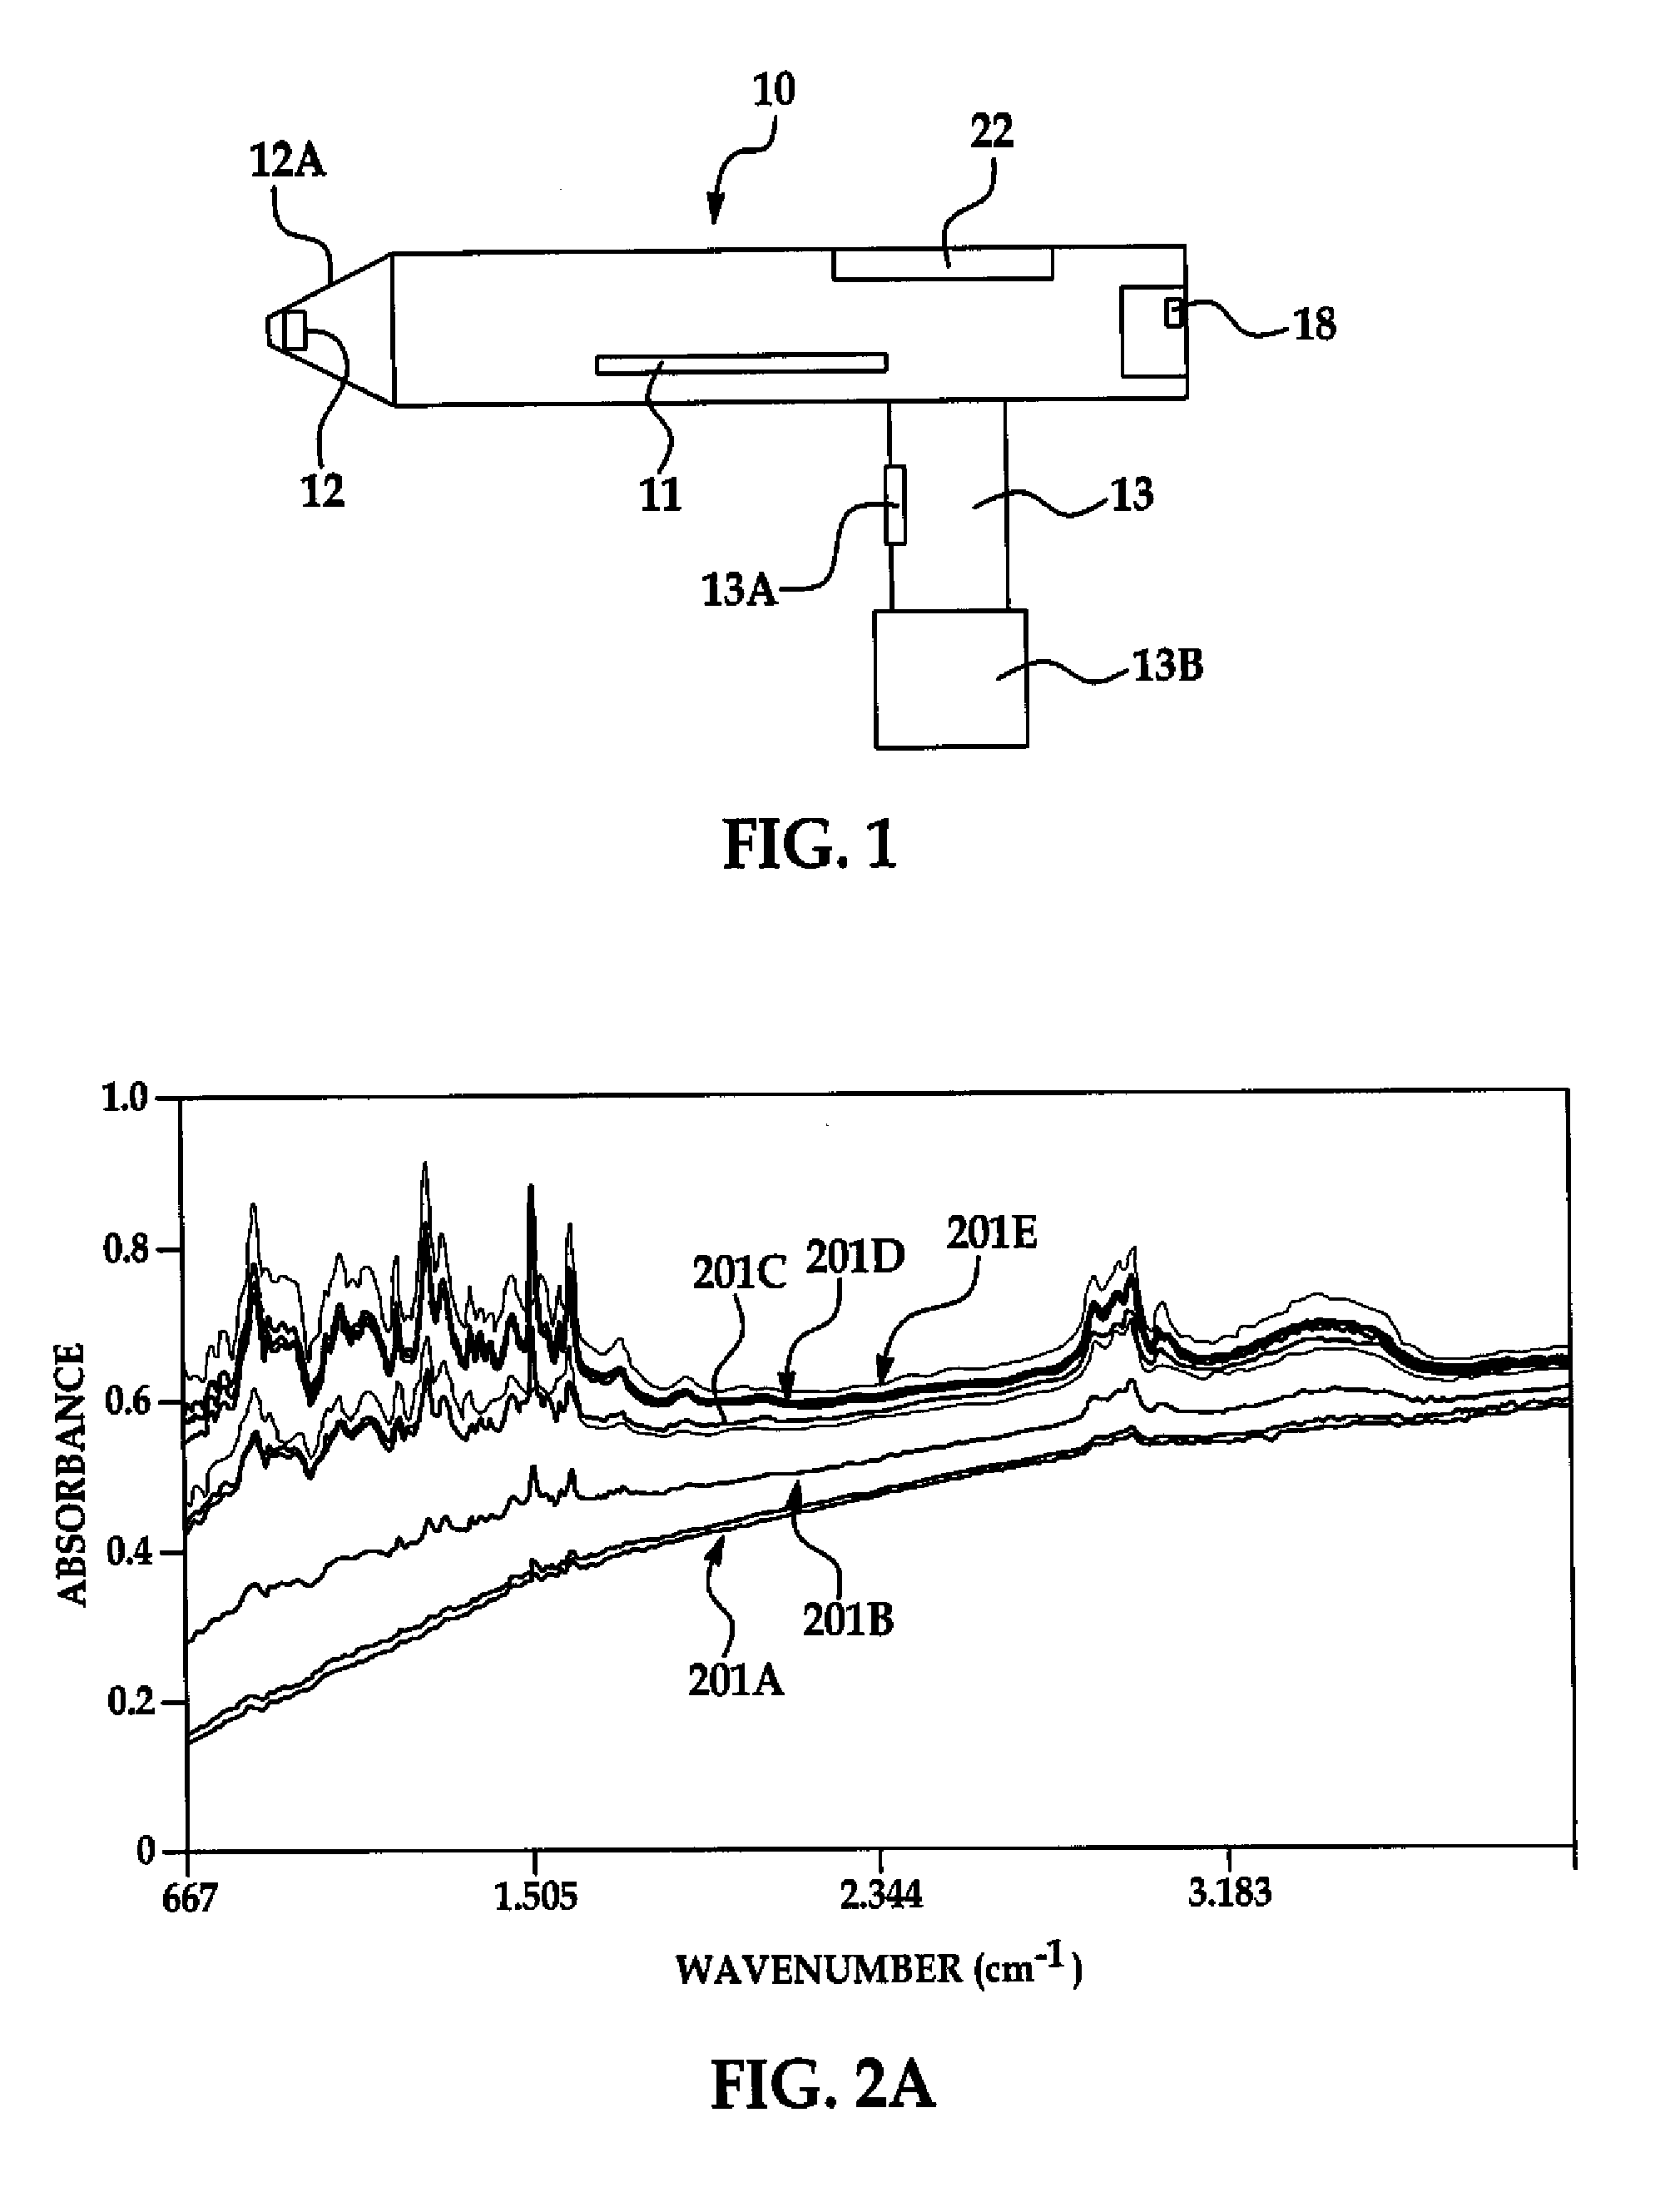 Method for performing mid-ir spectroscopy measurements to measure film coating thickness, weight and/or film composition